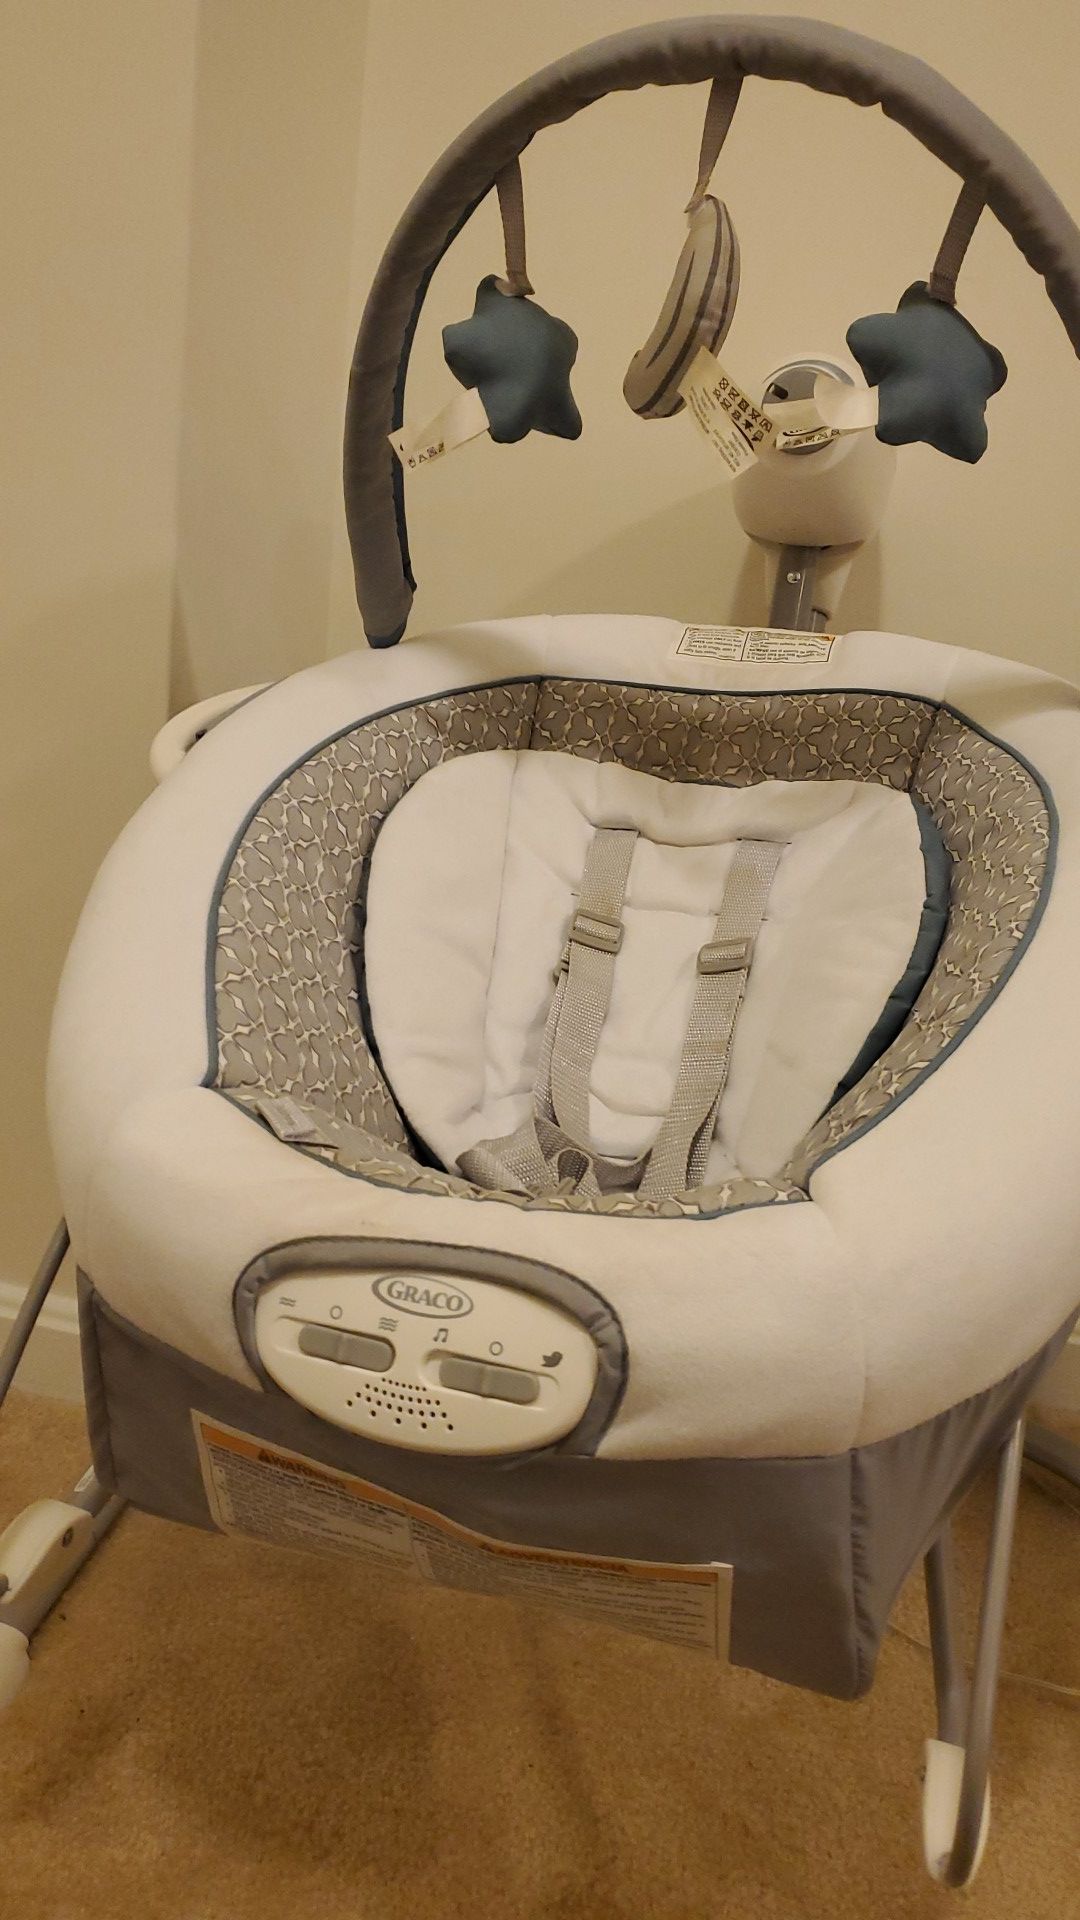 Graco Duet Soothe Swing and Rocker